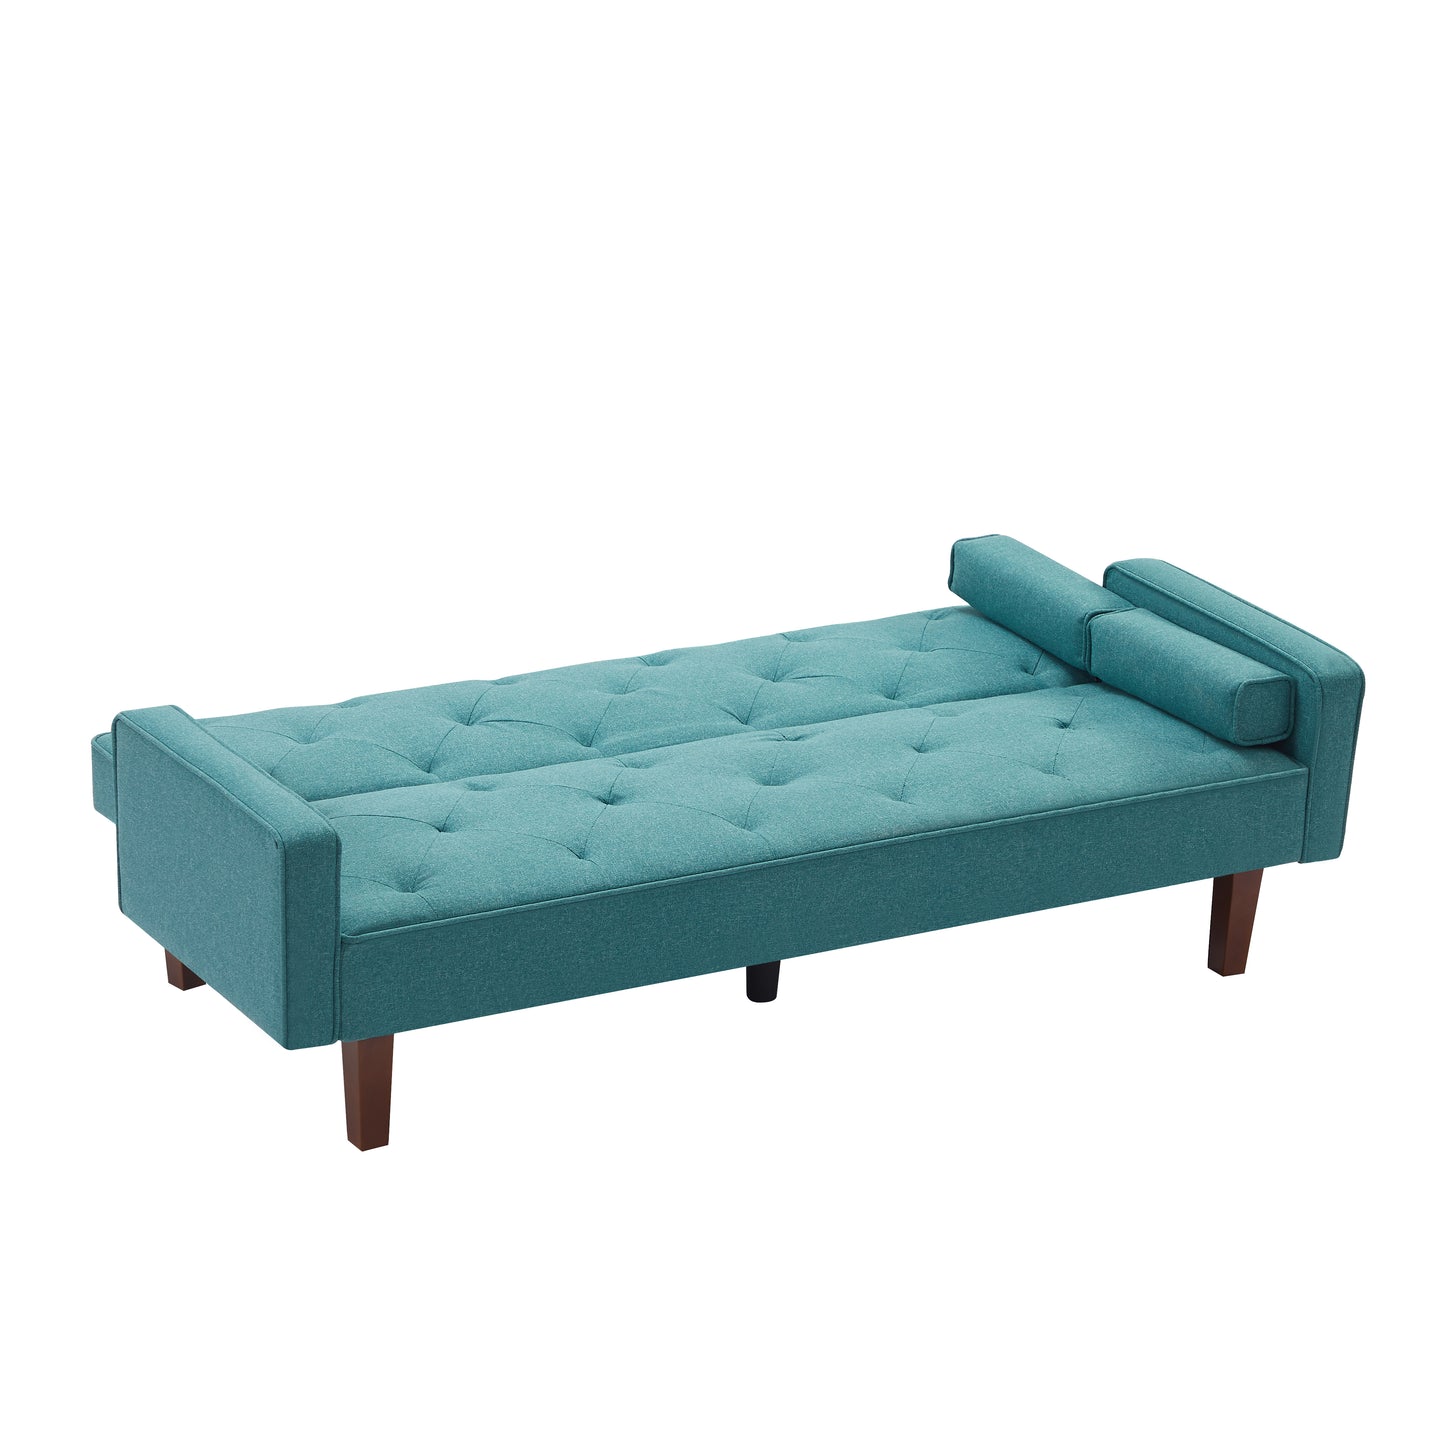 Green Sofa Bed with Square Pillow